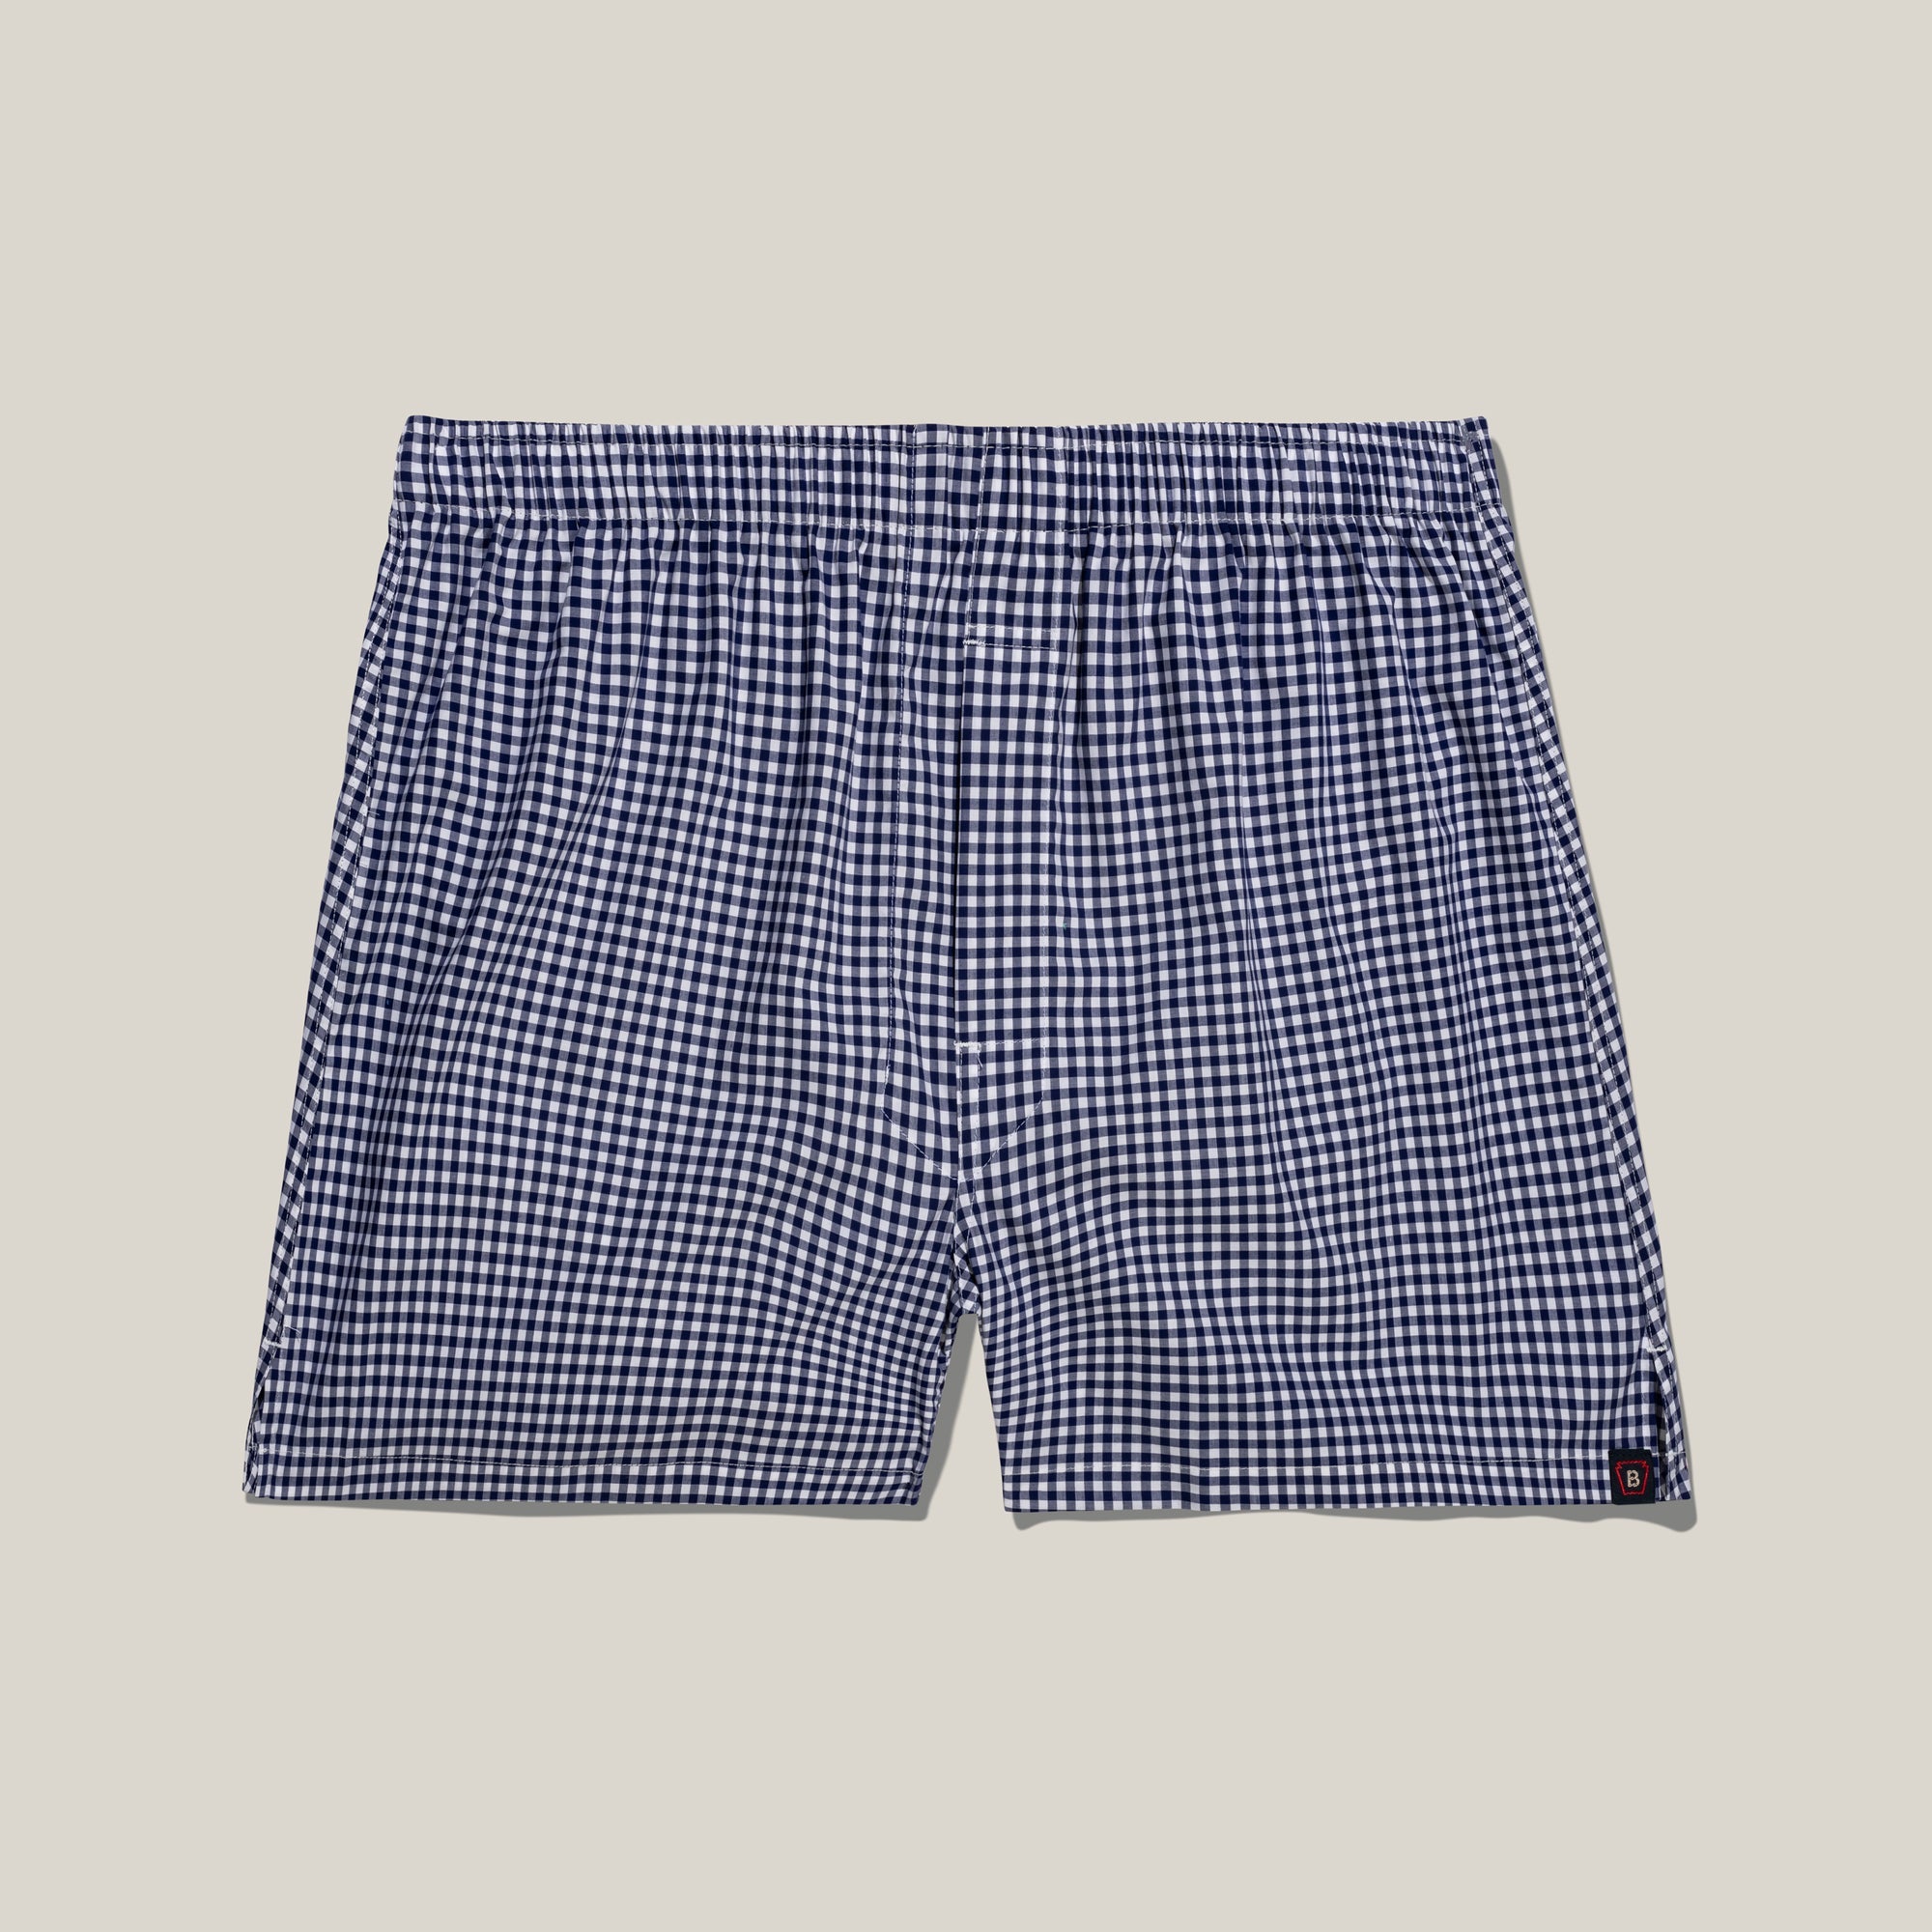 Classic Gingham Cotton Boxer in Navy and White (Size XX-Large) by Bills Khakis